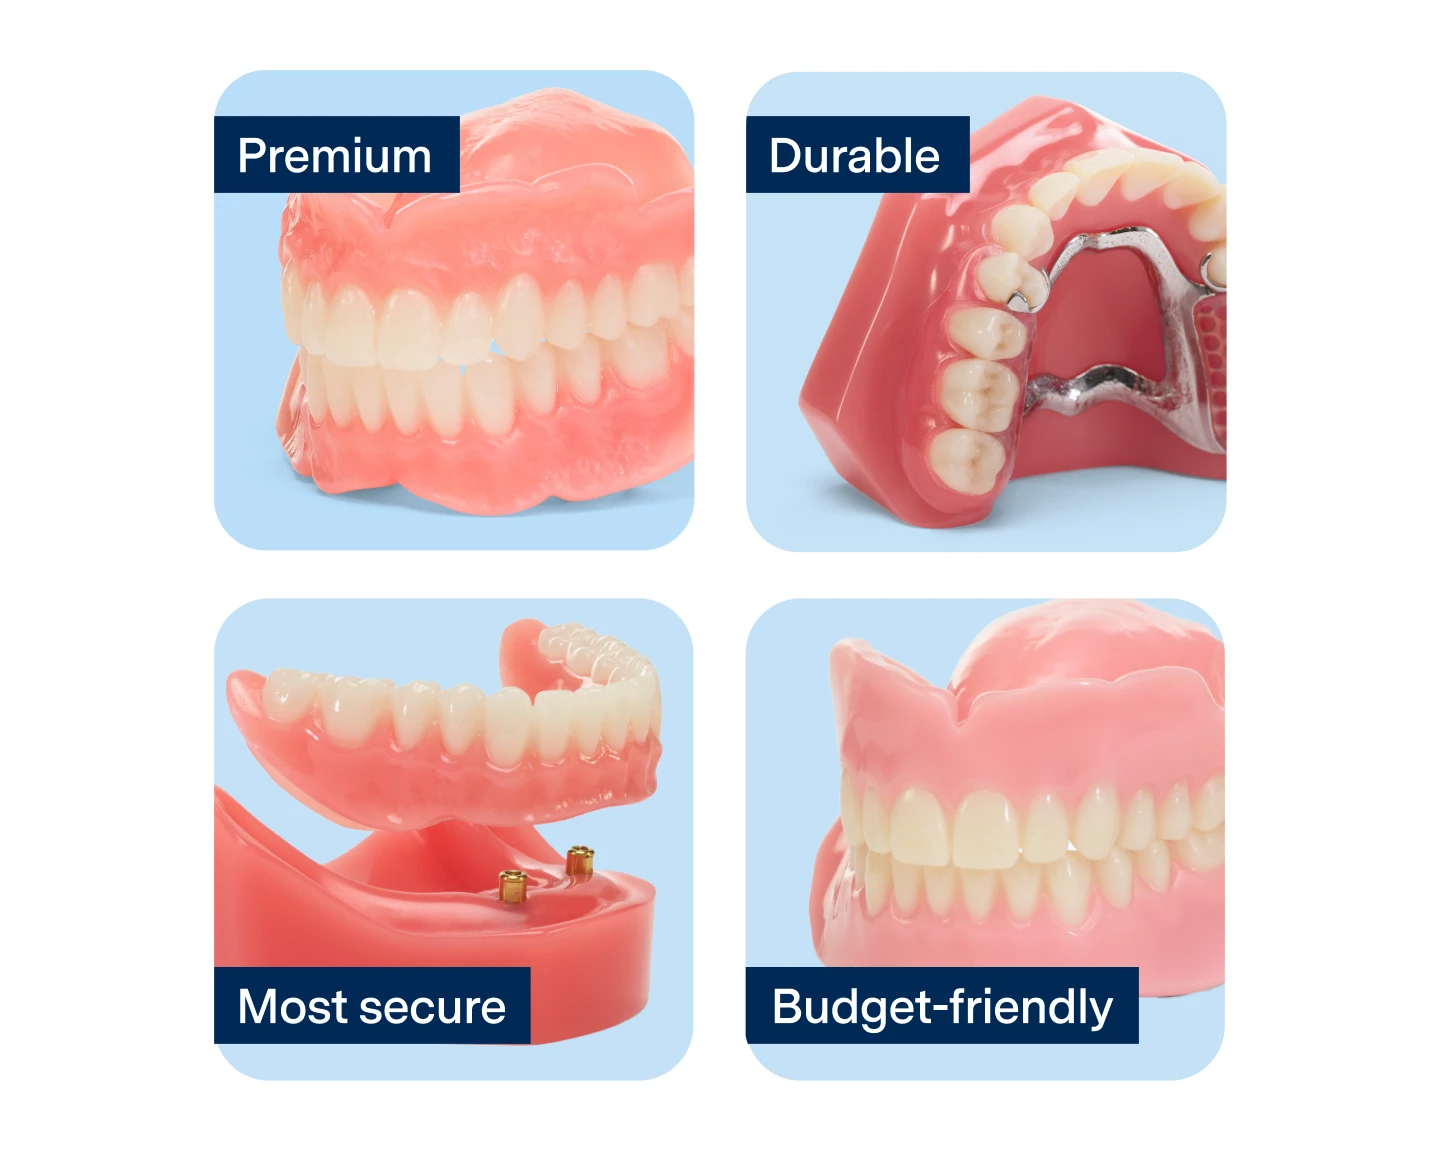 An infographic featuring four types of dentures with corresponding labels: 'Premium', 'Durable', 'Most secure', 'Budget-friendly'.